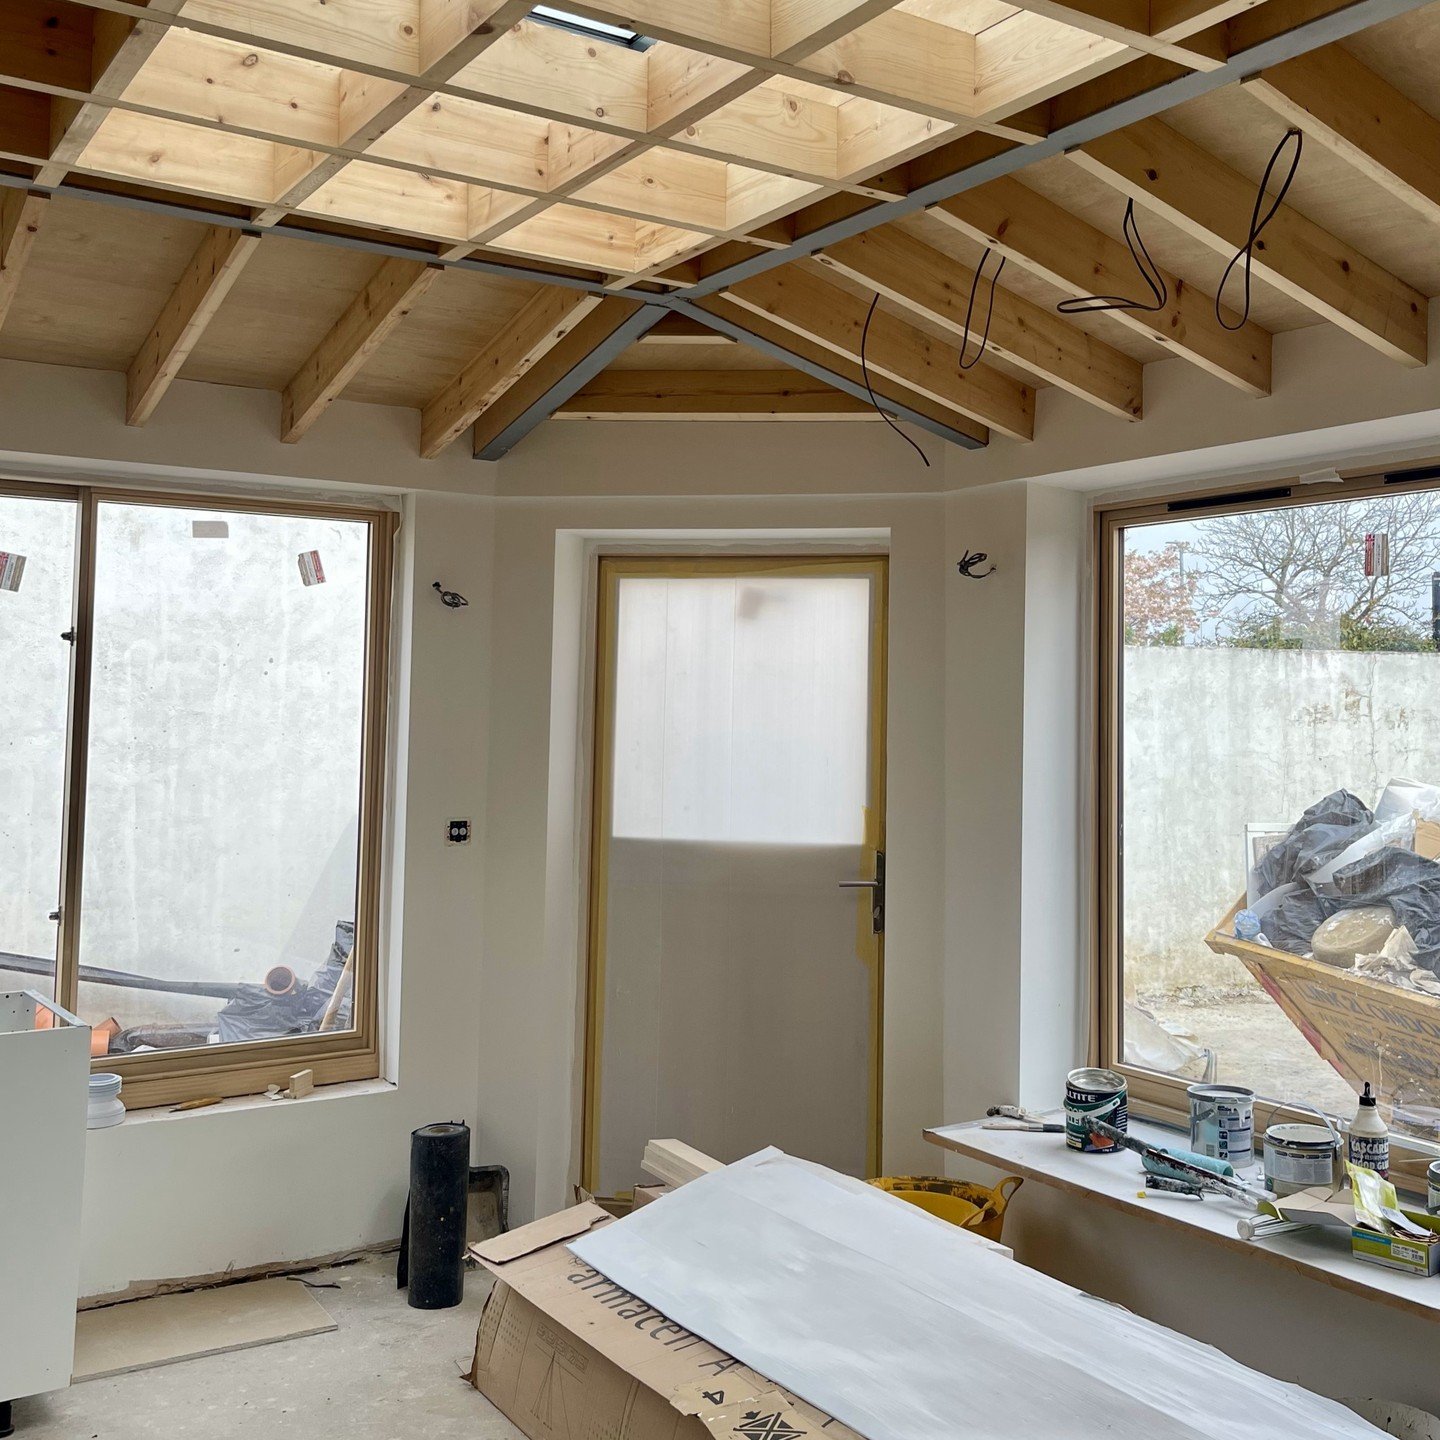 Another shot of our Wandsworth project which is finally taking shape on site. The Douglas Fir grid-shell roof is almost complete and we love how much this transforms the ceiling into such a statement feature of the space. Swipe for a dramatic before 